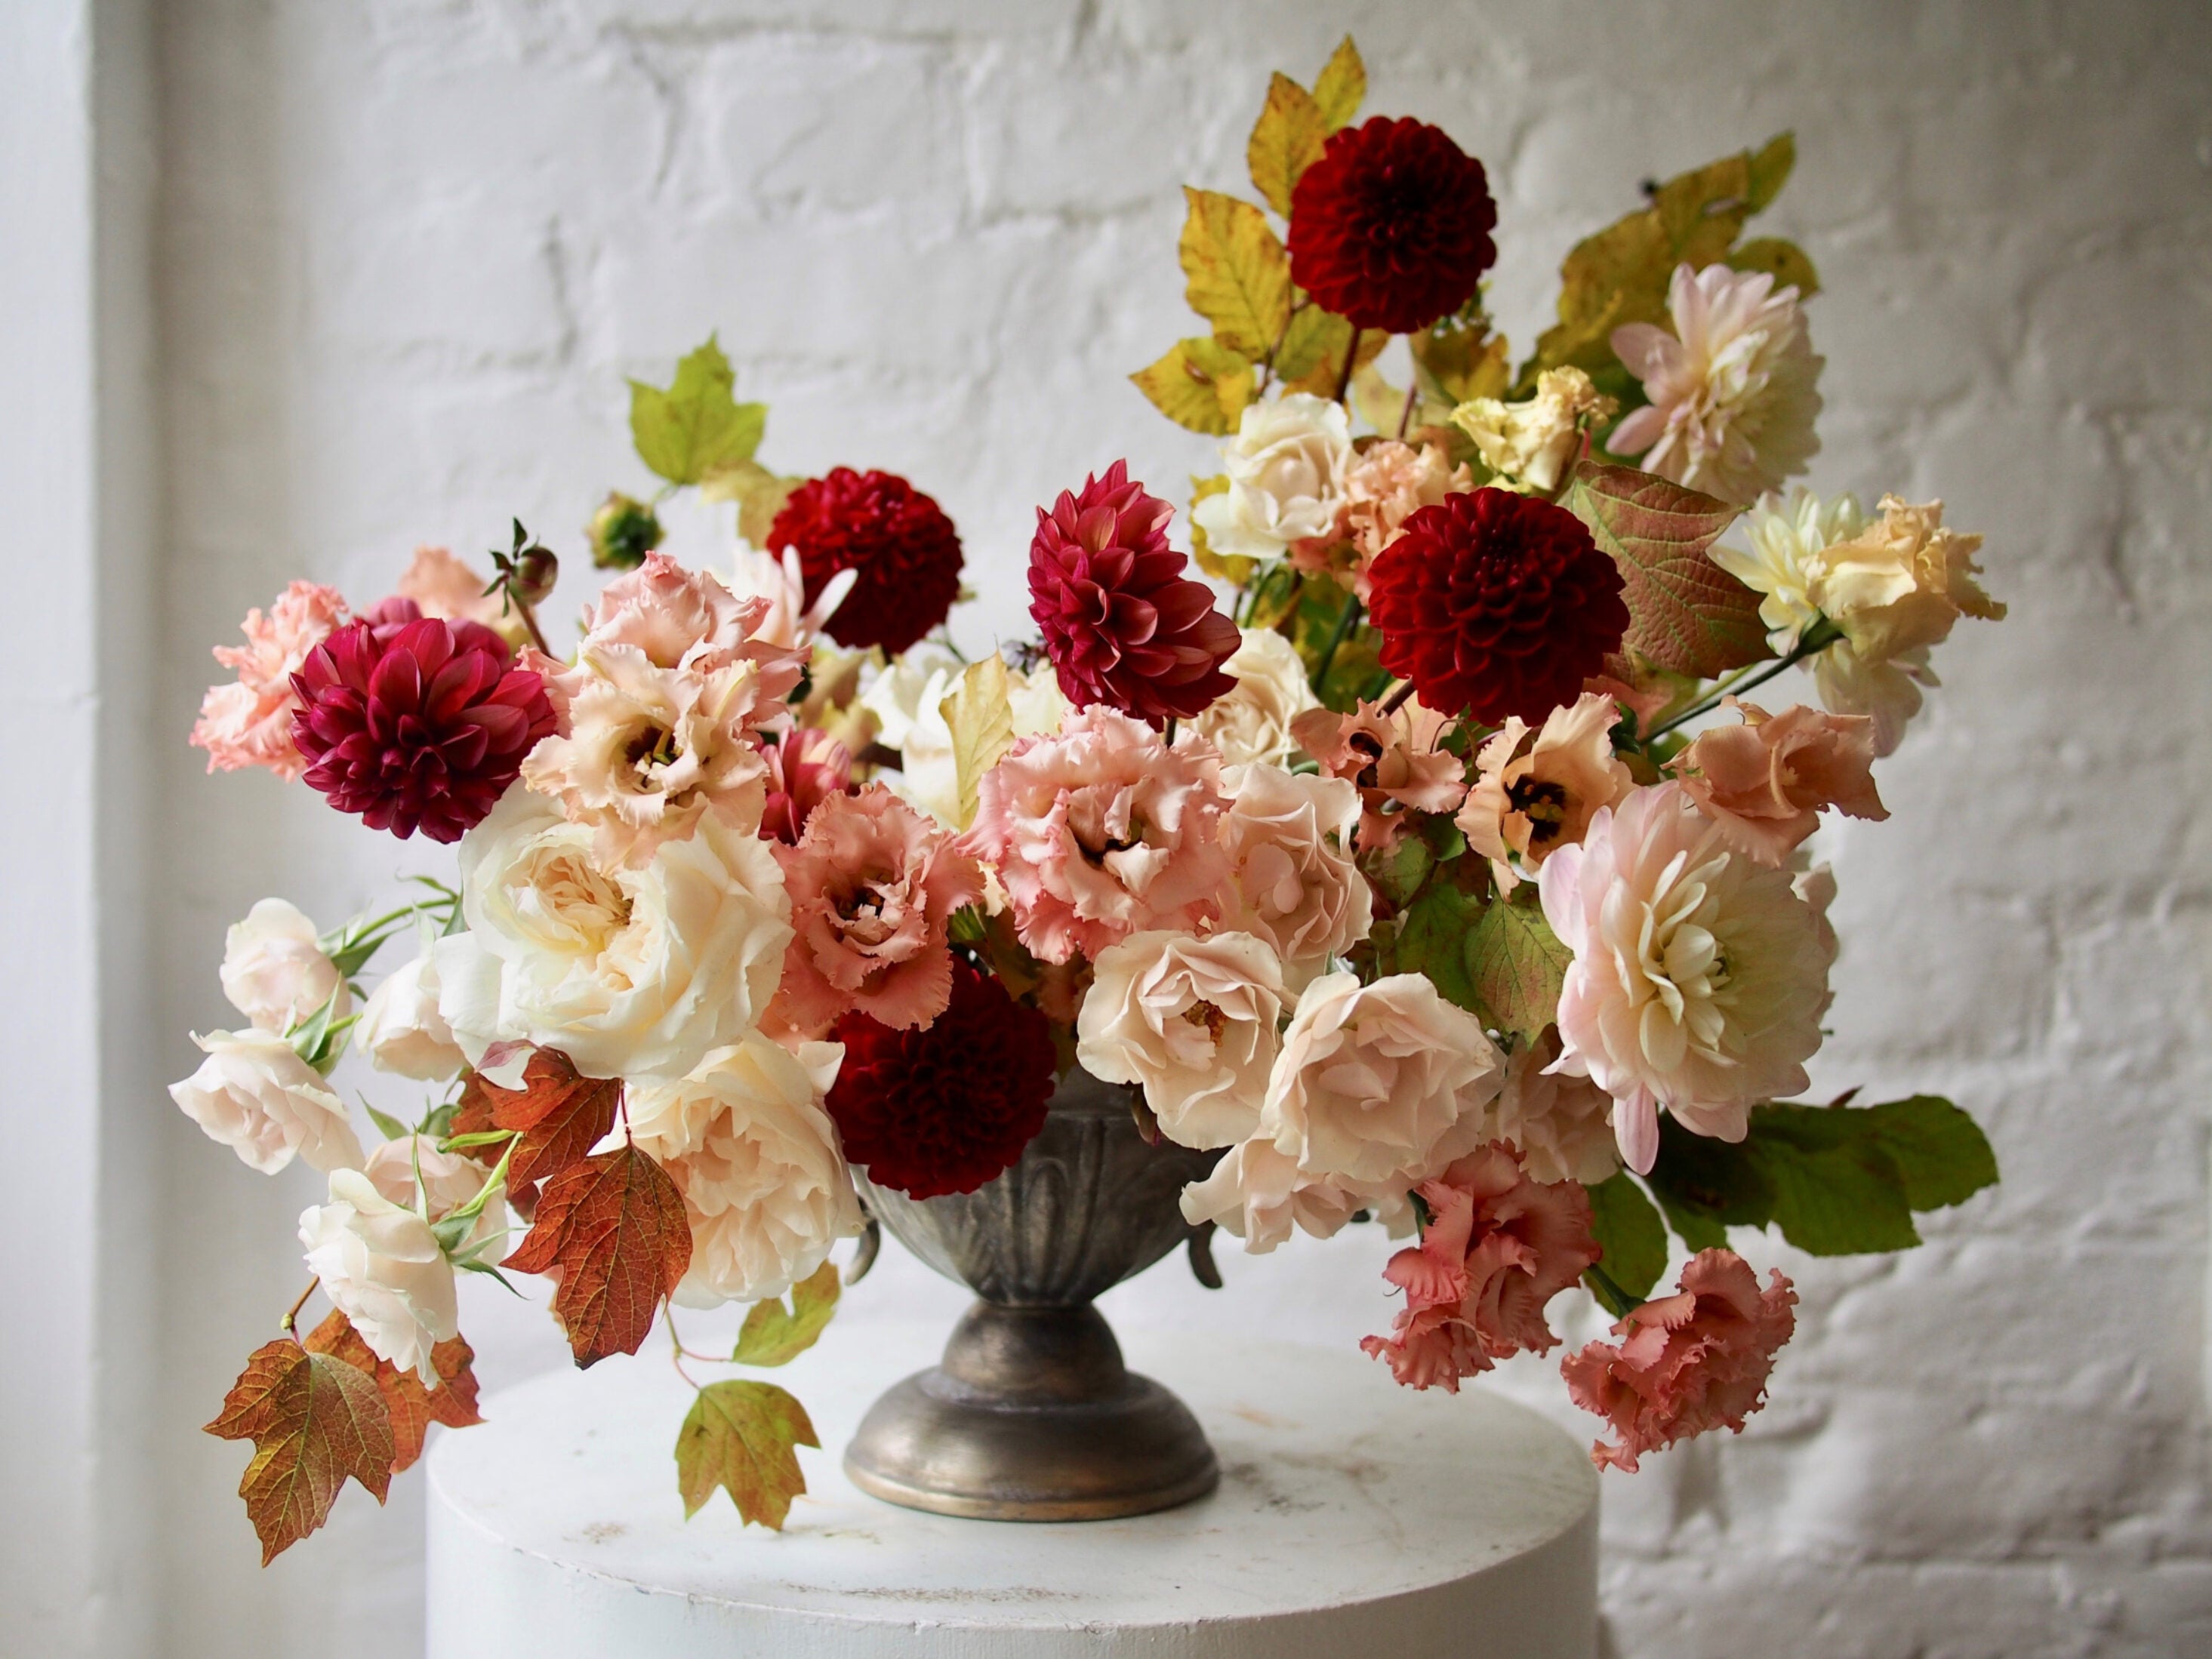 The Best Independent Florists in London